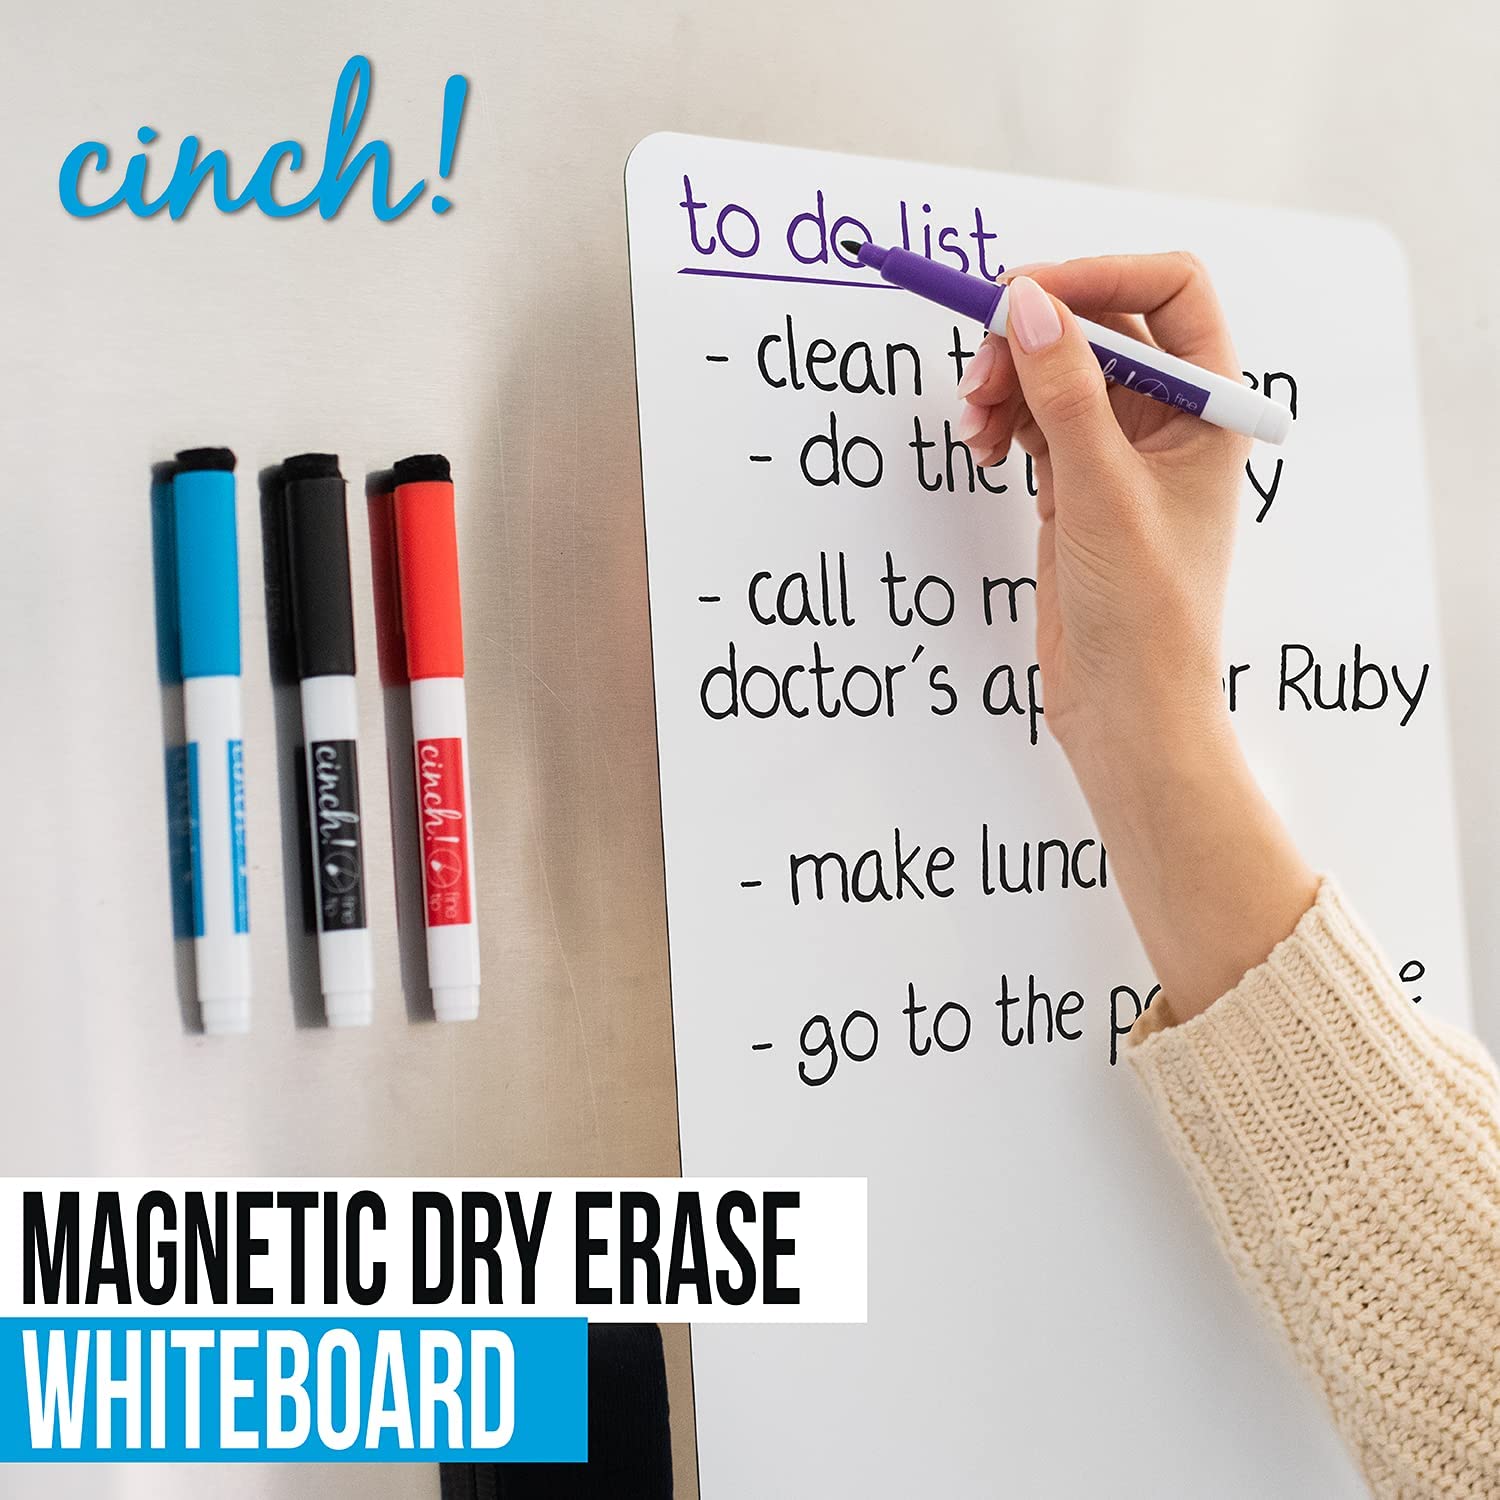 Prefer Green Magnetic Dry Eraser White Board Sheet for Kitchen Refrigerator with Stain Resistant Technology, Organizer & Planner Whiteboard